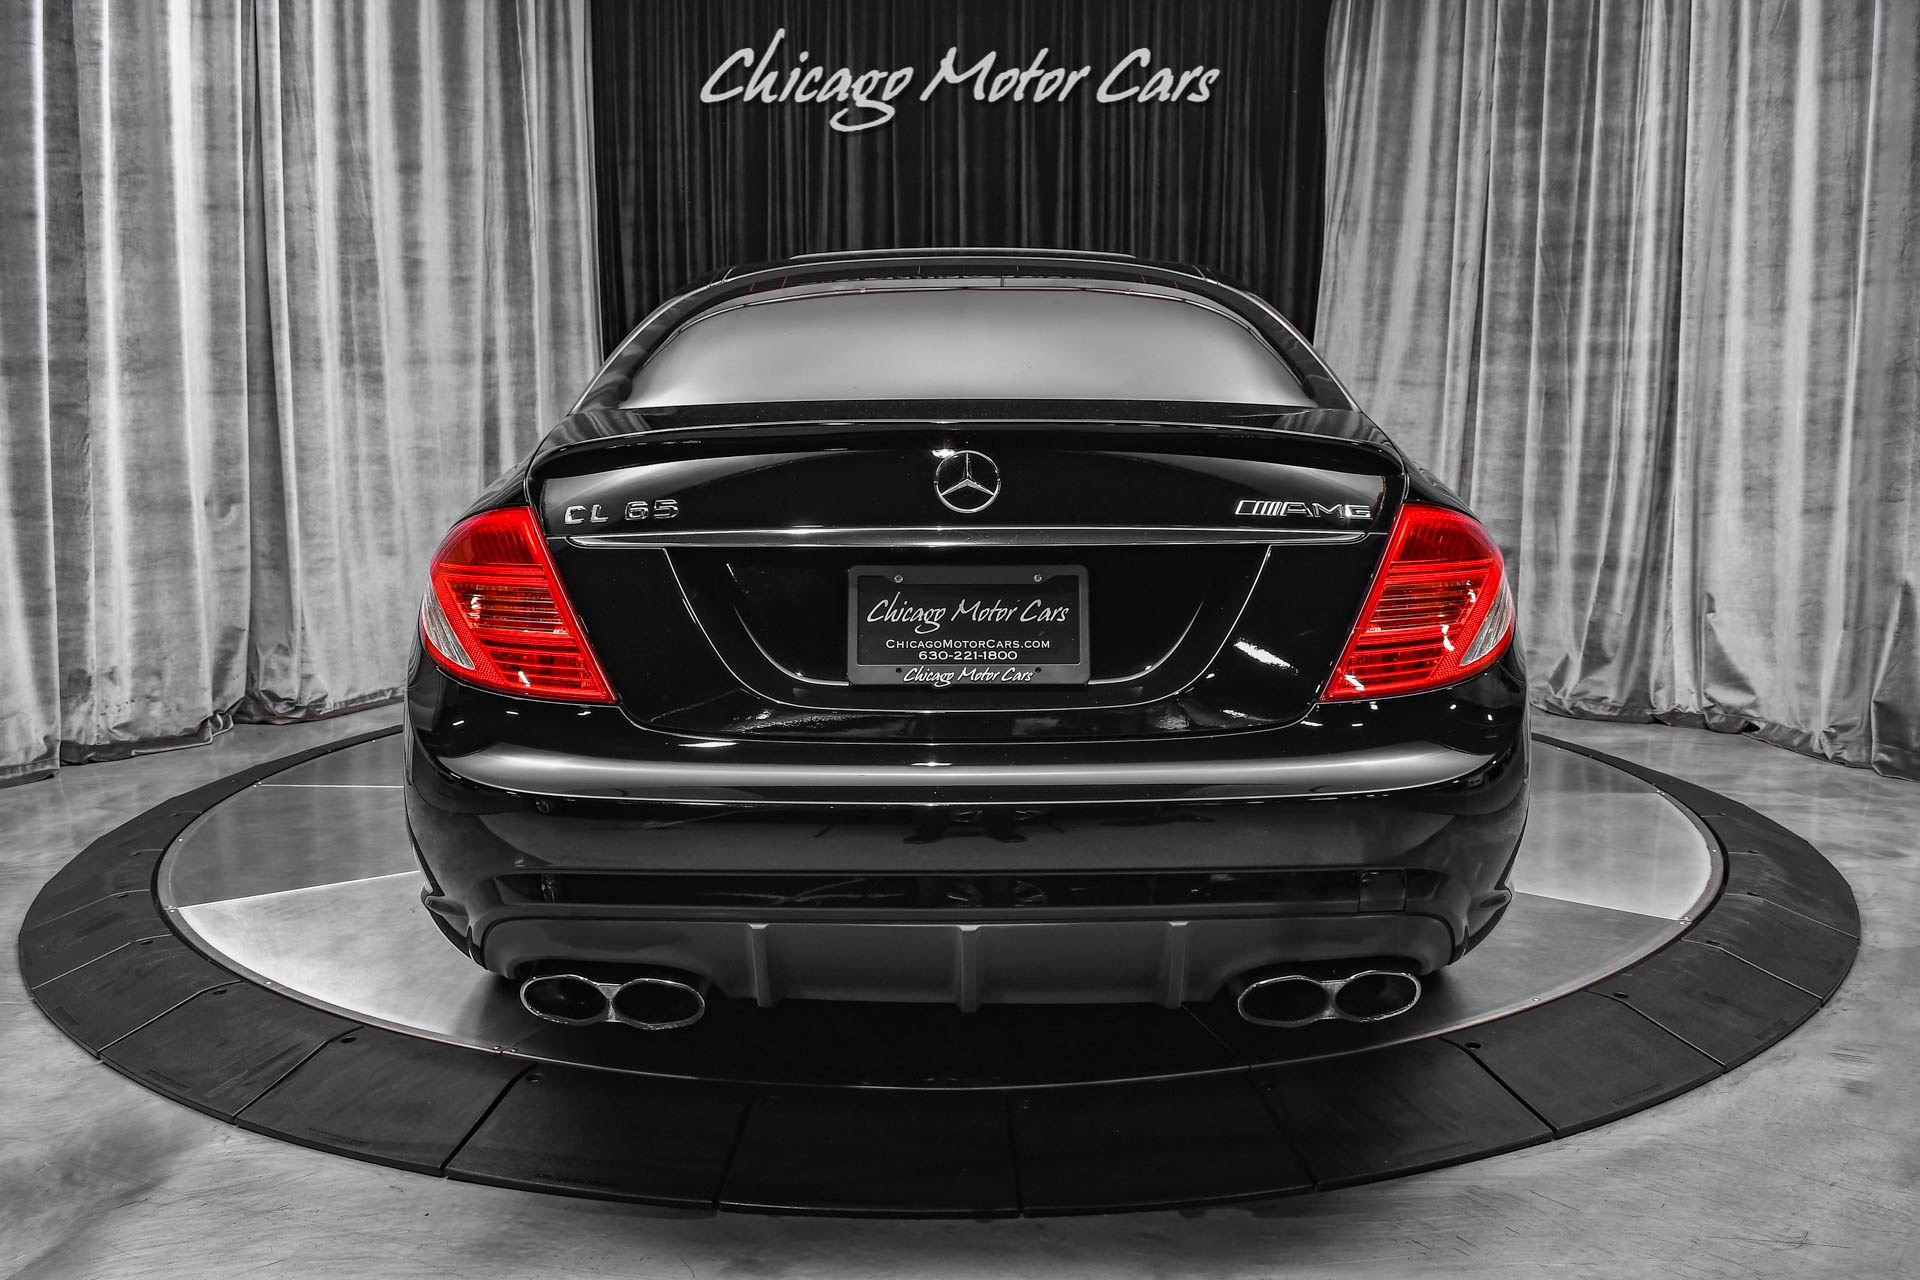 Used-2008-Mercedes-Benz-CL65-AMG-Coupe-600-HP-Twin-Turbo-V12-Integration-Pack-Massage-Seats